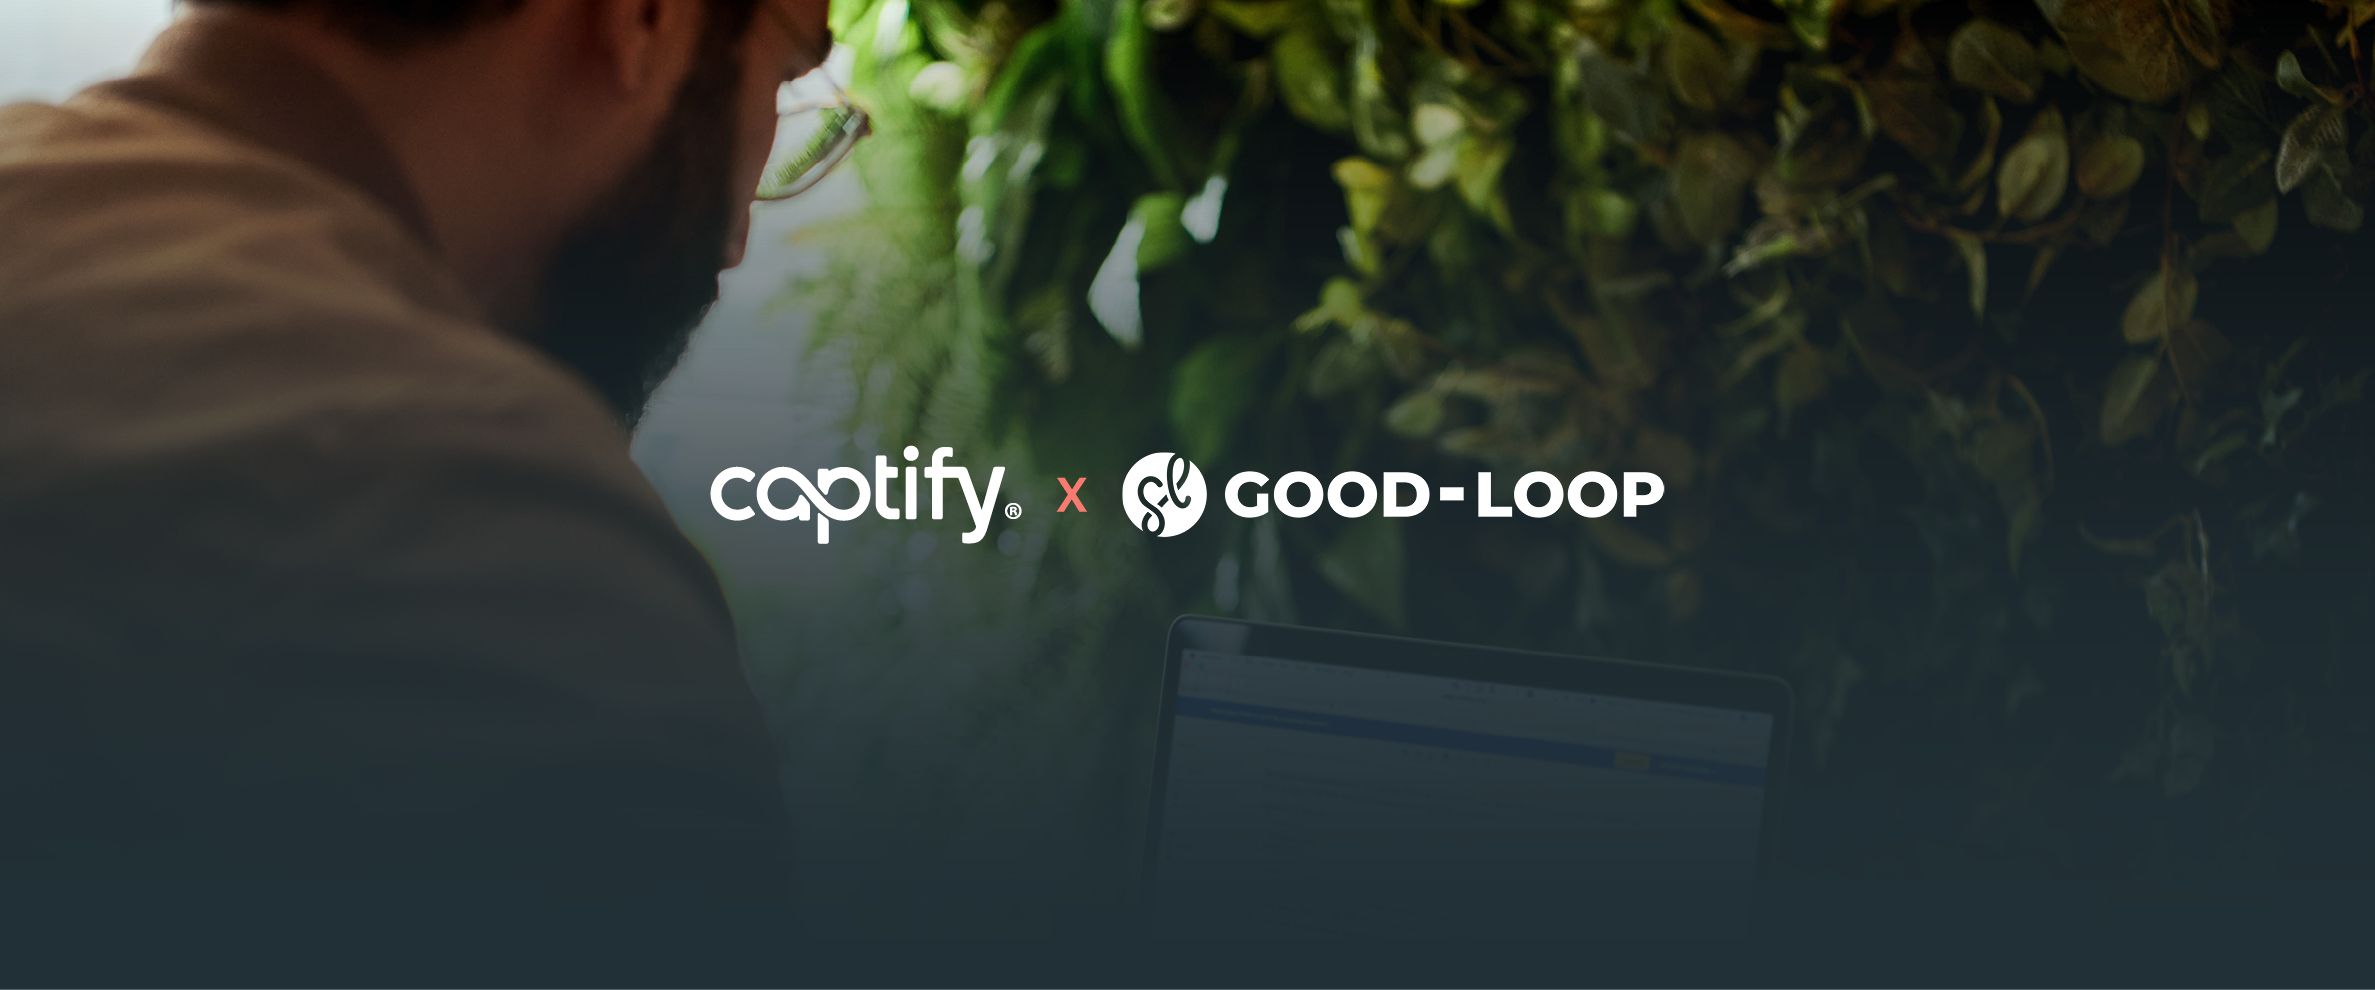 Captify To Track Environmental Impact Of Online Ads Following Global Partnership With Good-Loop